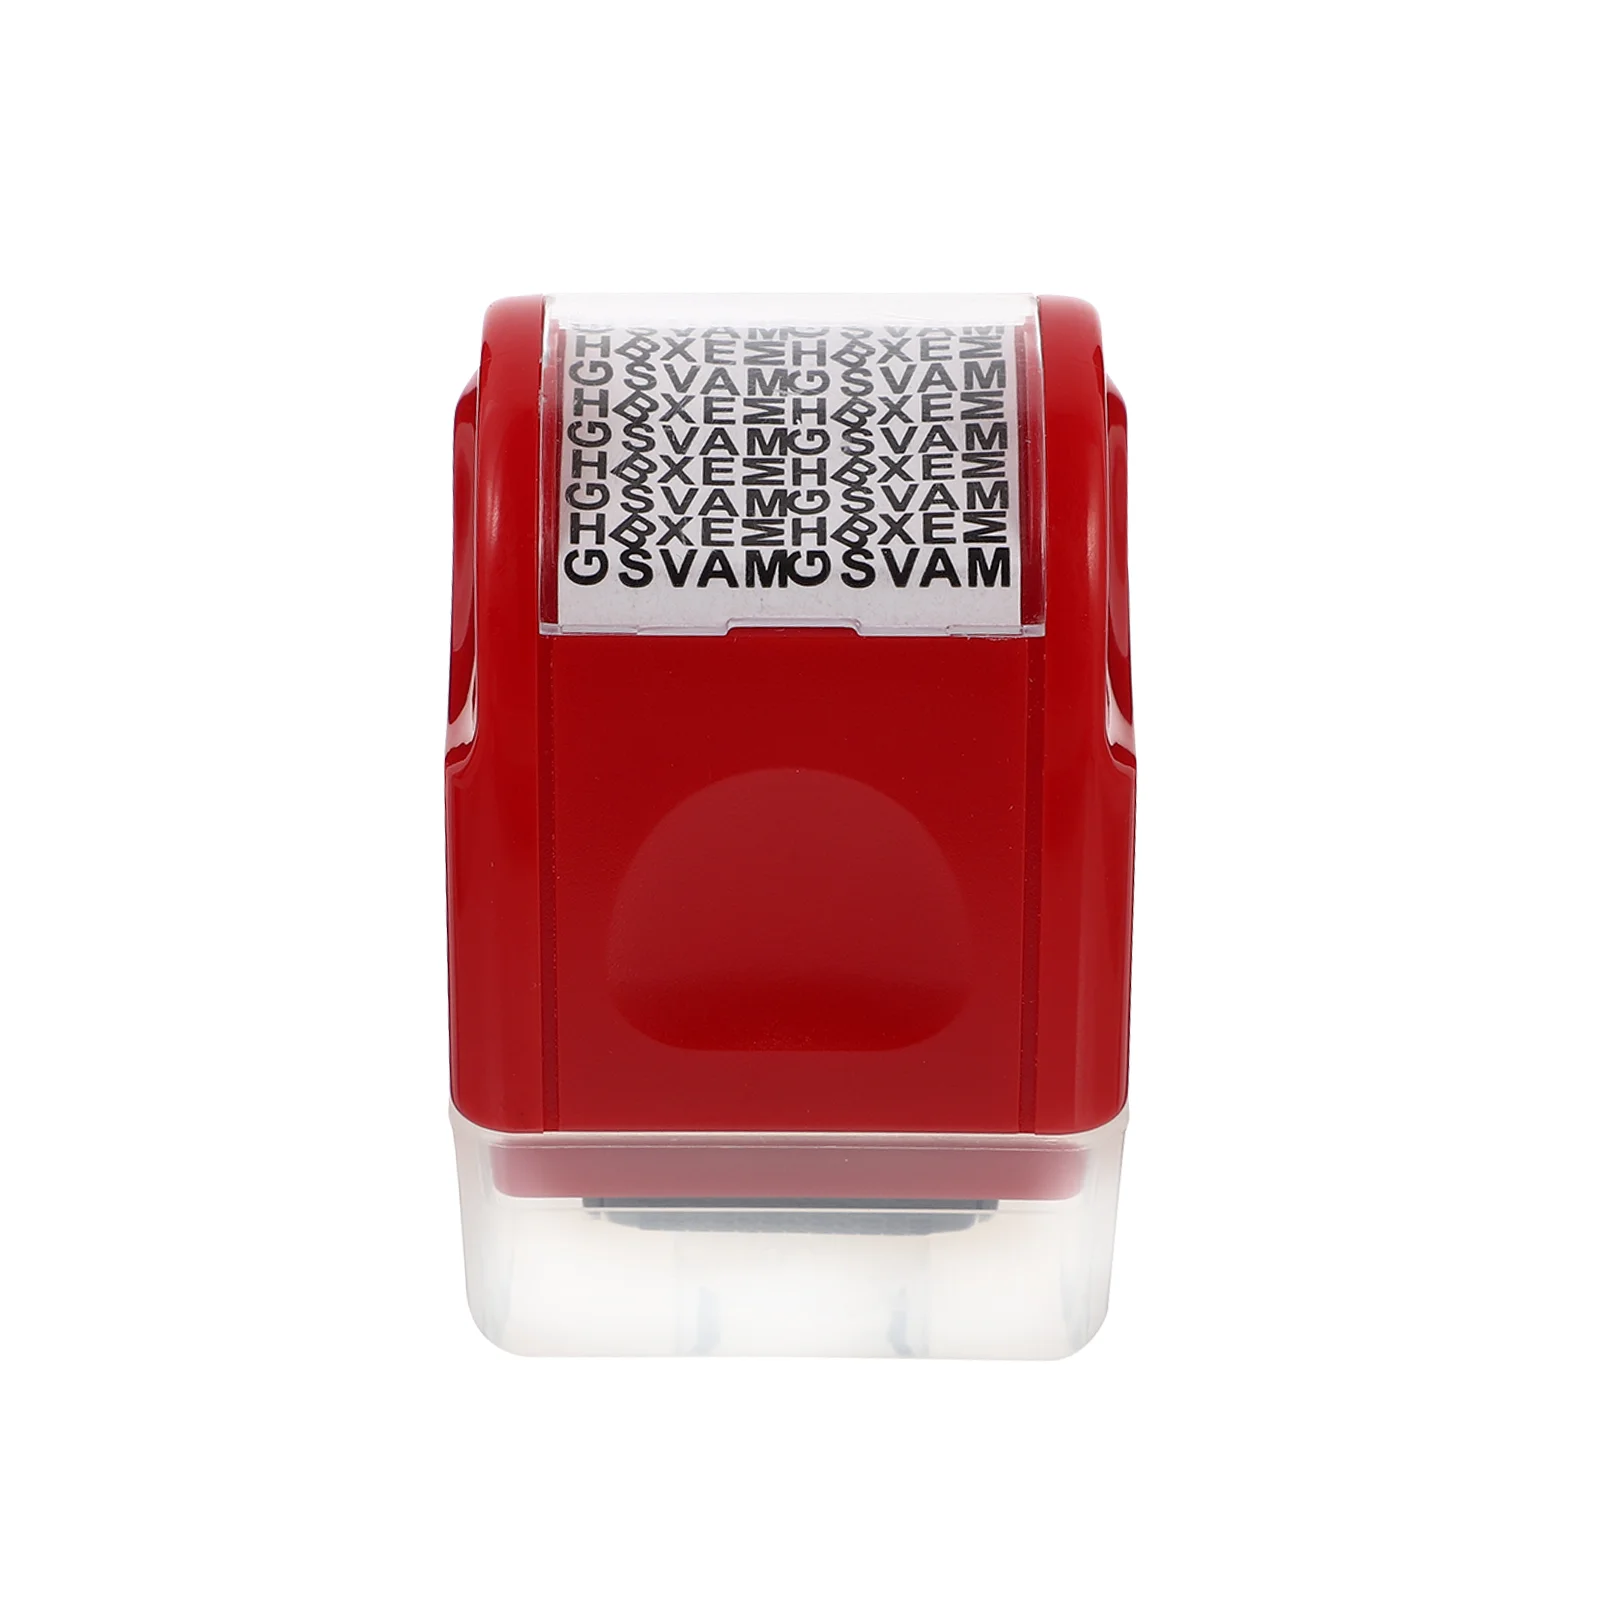 

The The The Name Stamp Confidentiality Seal Personal Private Security 6x4x3cm Red Plastic